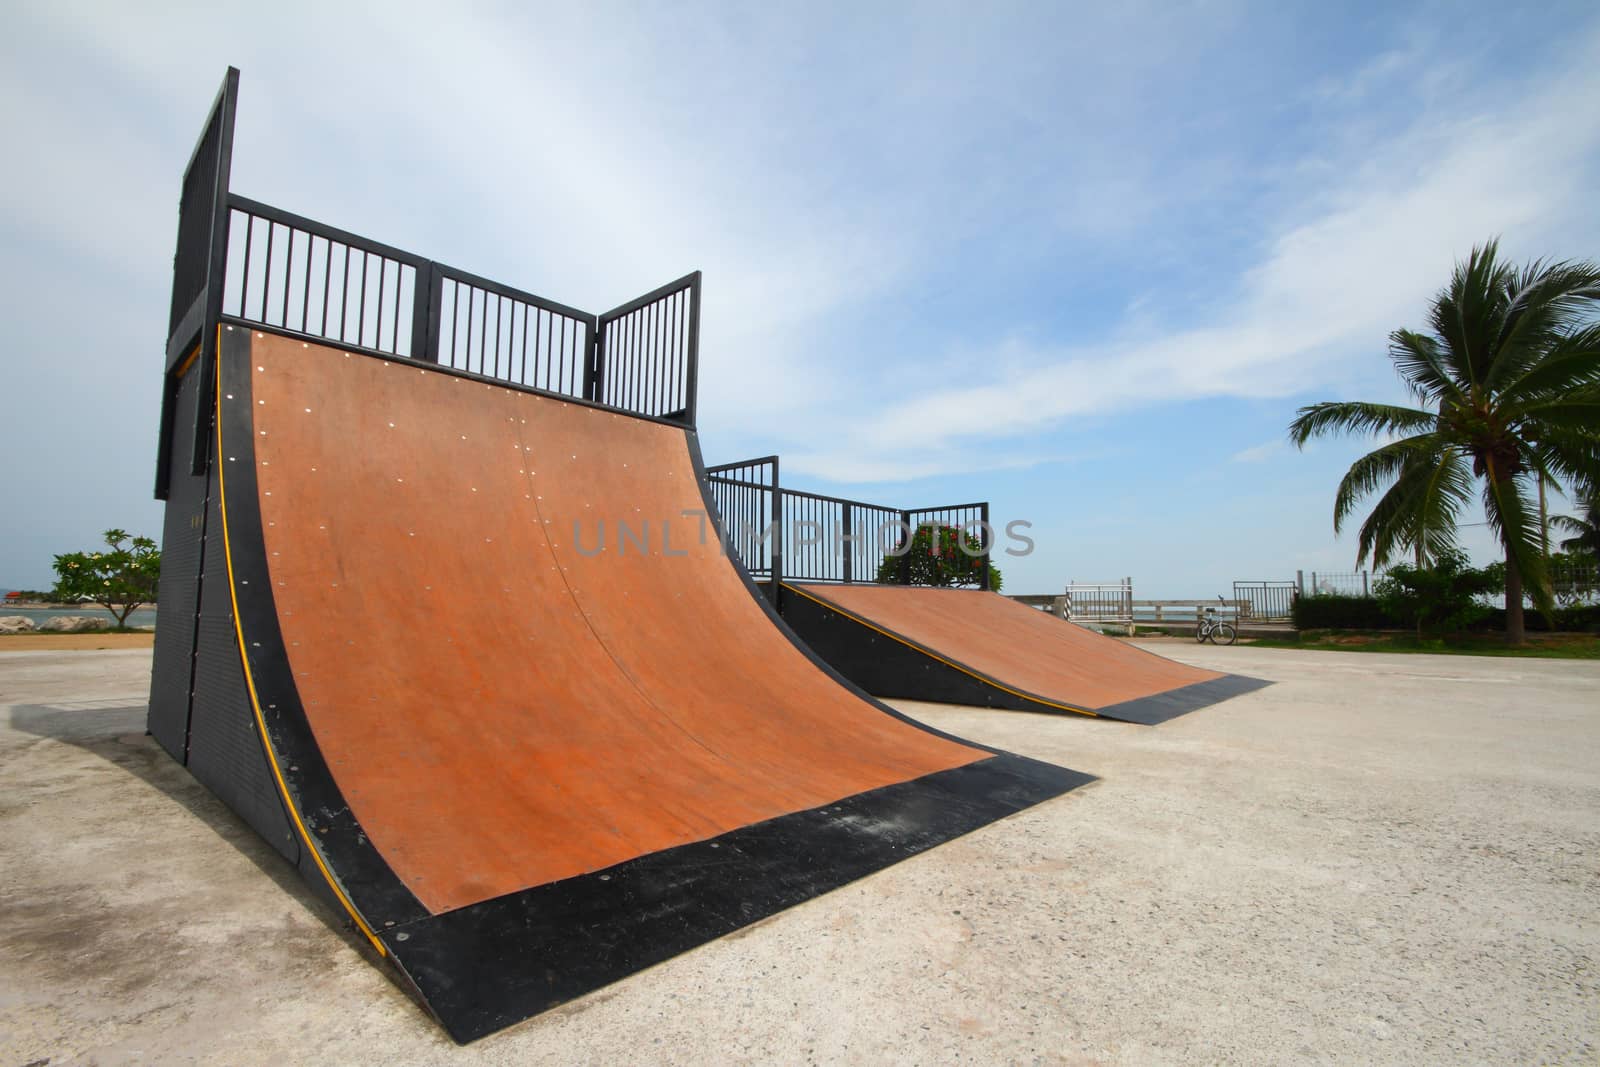 nice skate and other sports park on puplic xtreme park